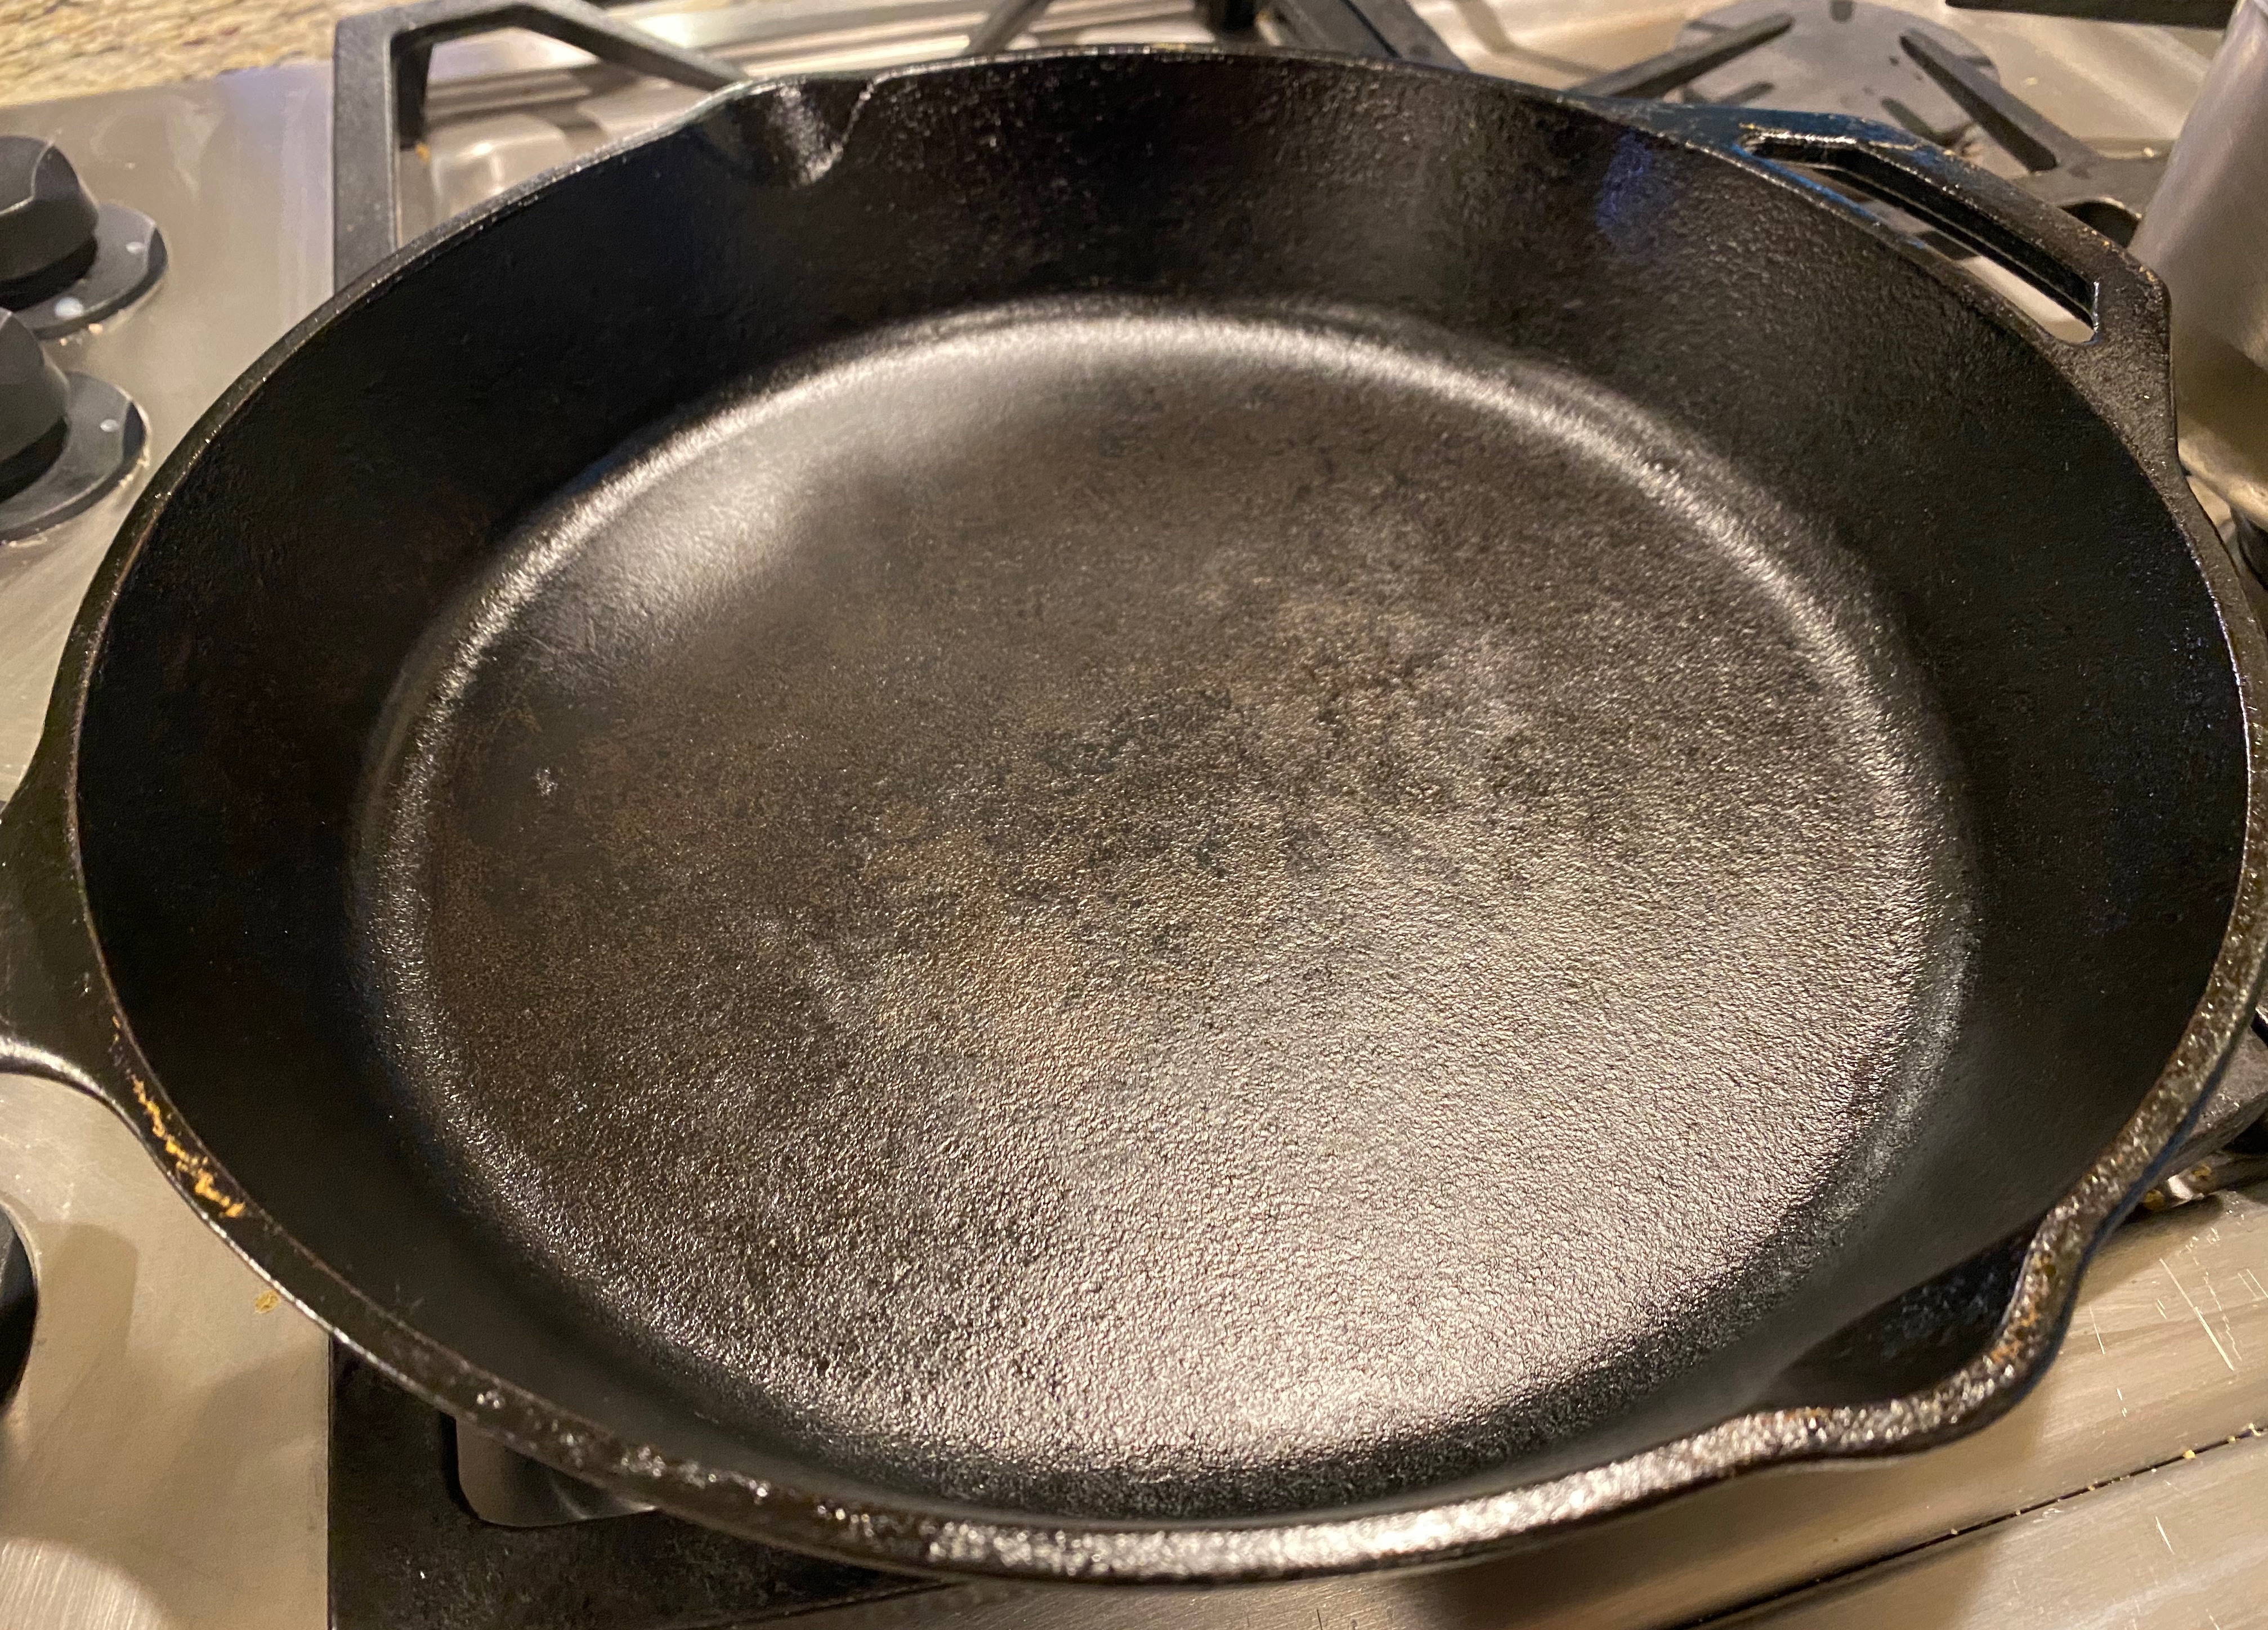 How to Season a Cast Iron Skillet - Tips for Seasoning a Cast Iron Skillet